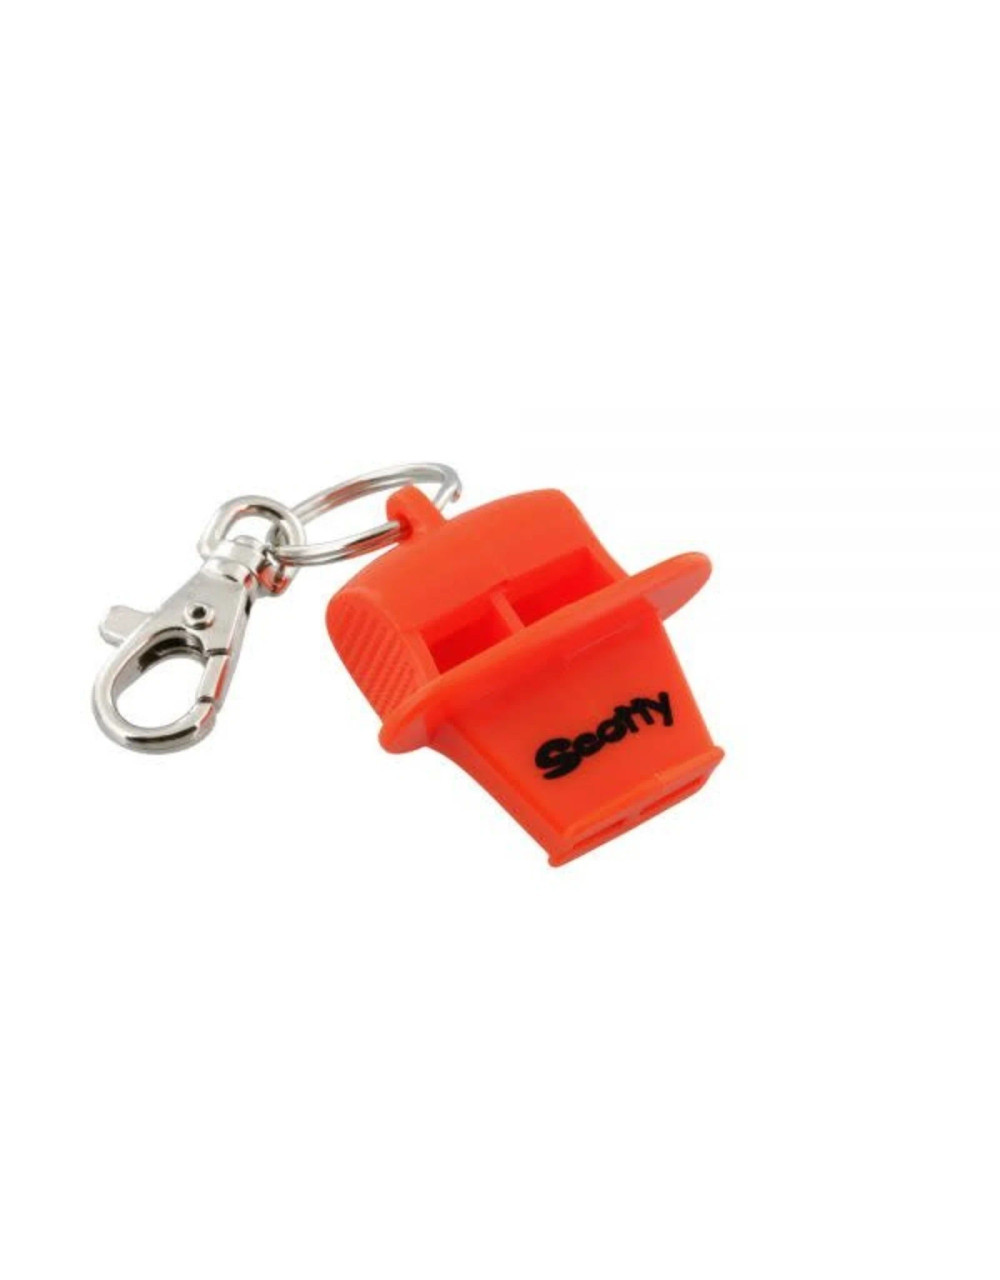 Scotty Pealess Life Saver Whistle